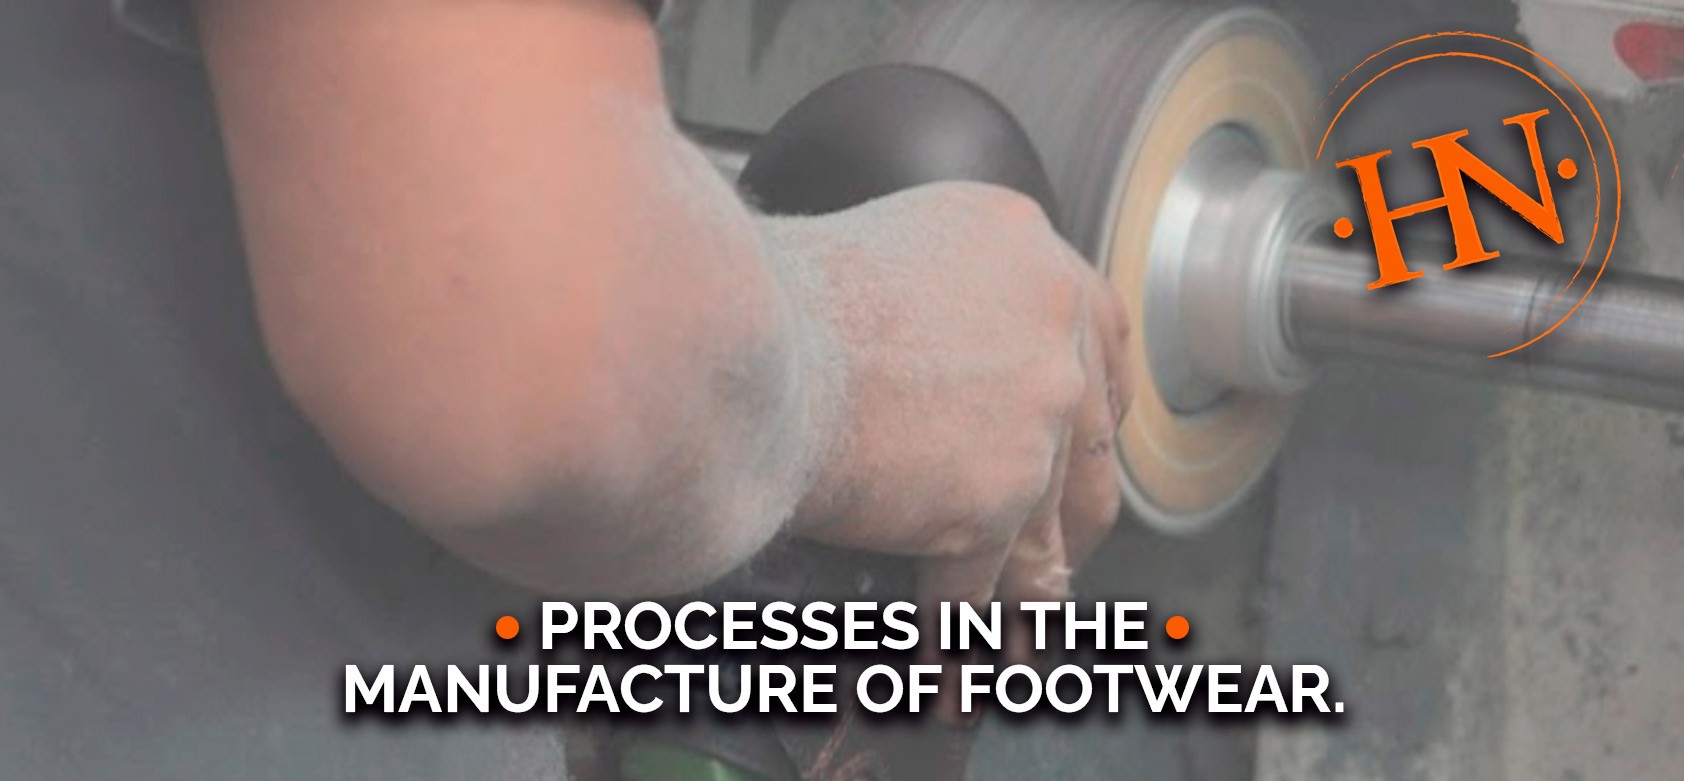 Processes-in-the-manufacture-of-footwear.